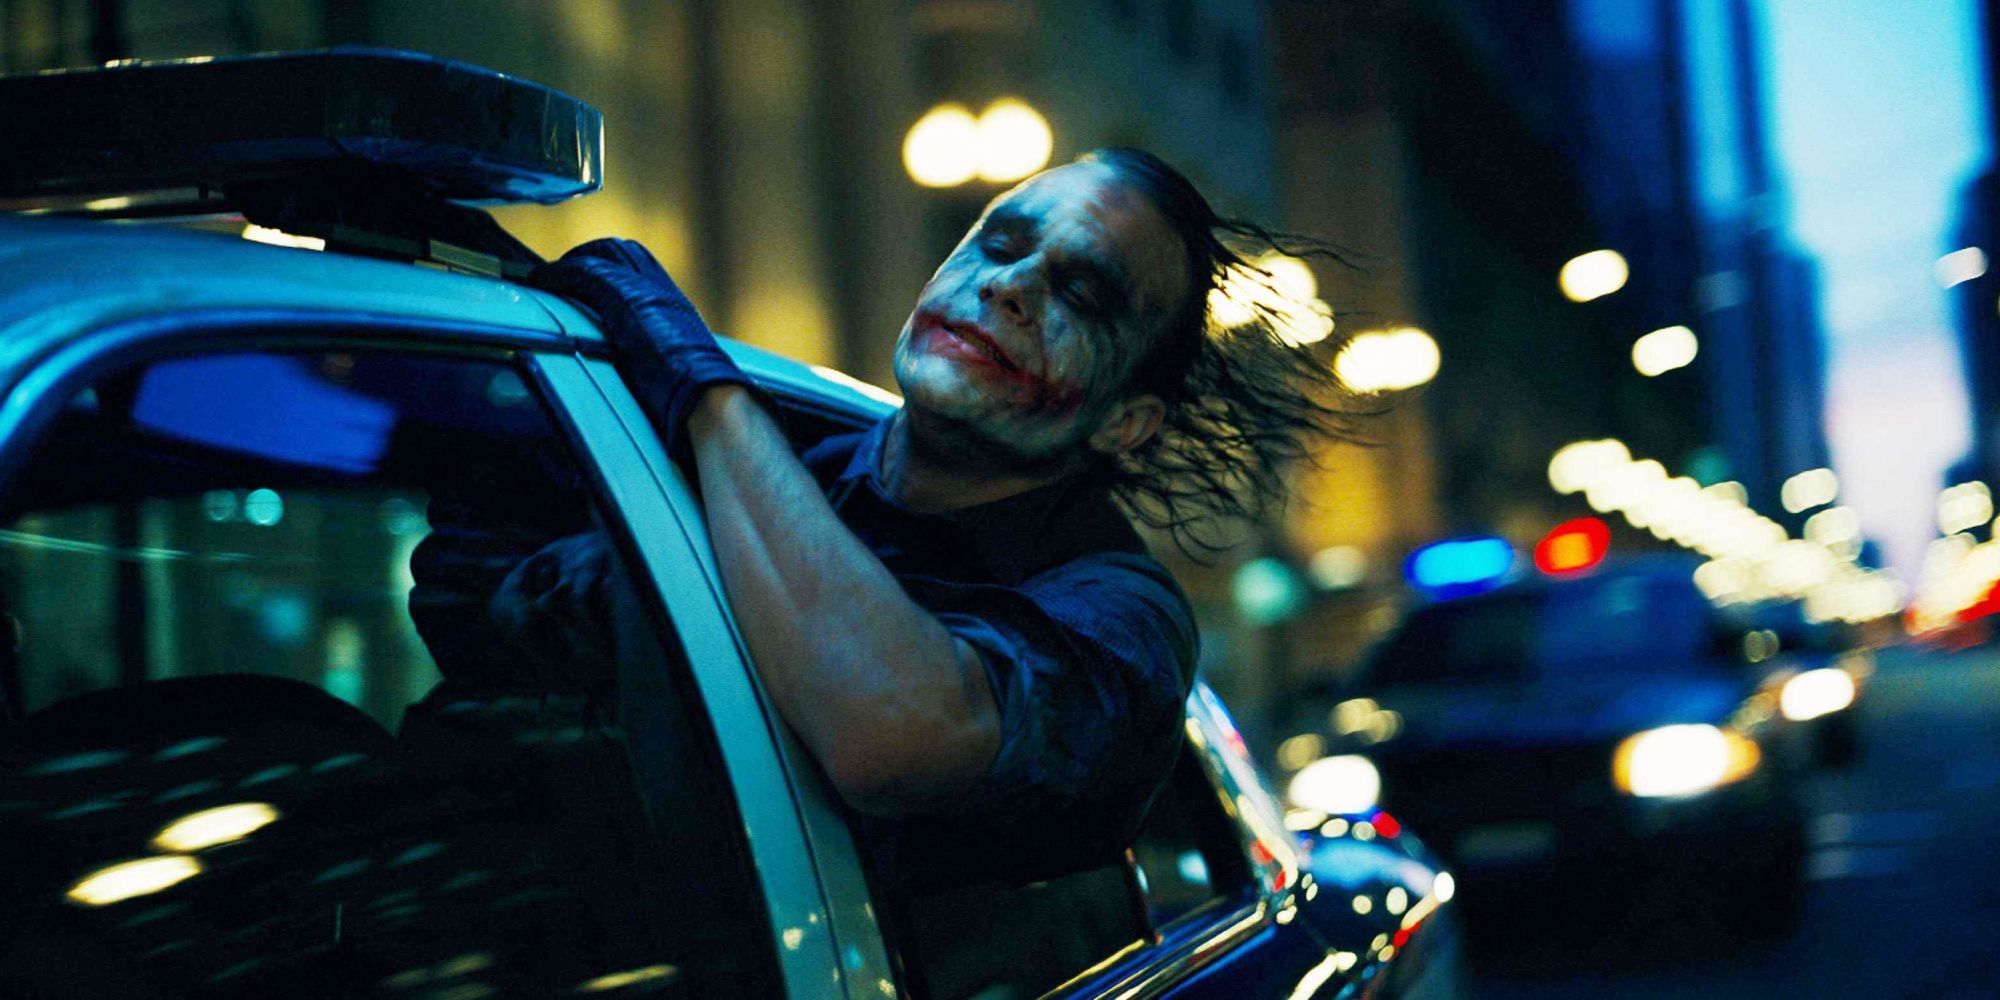 Heath Ledger as The Joker sticks his head out the window in The Dark Knight